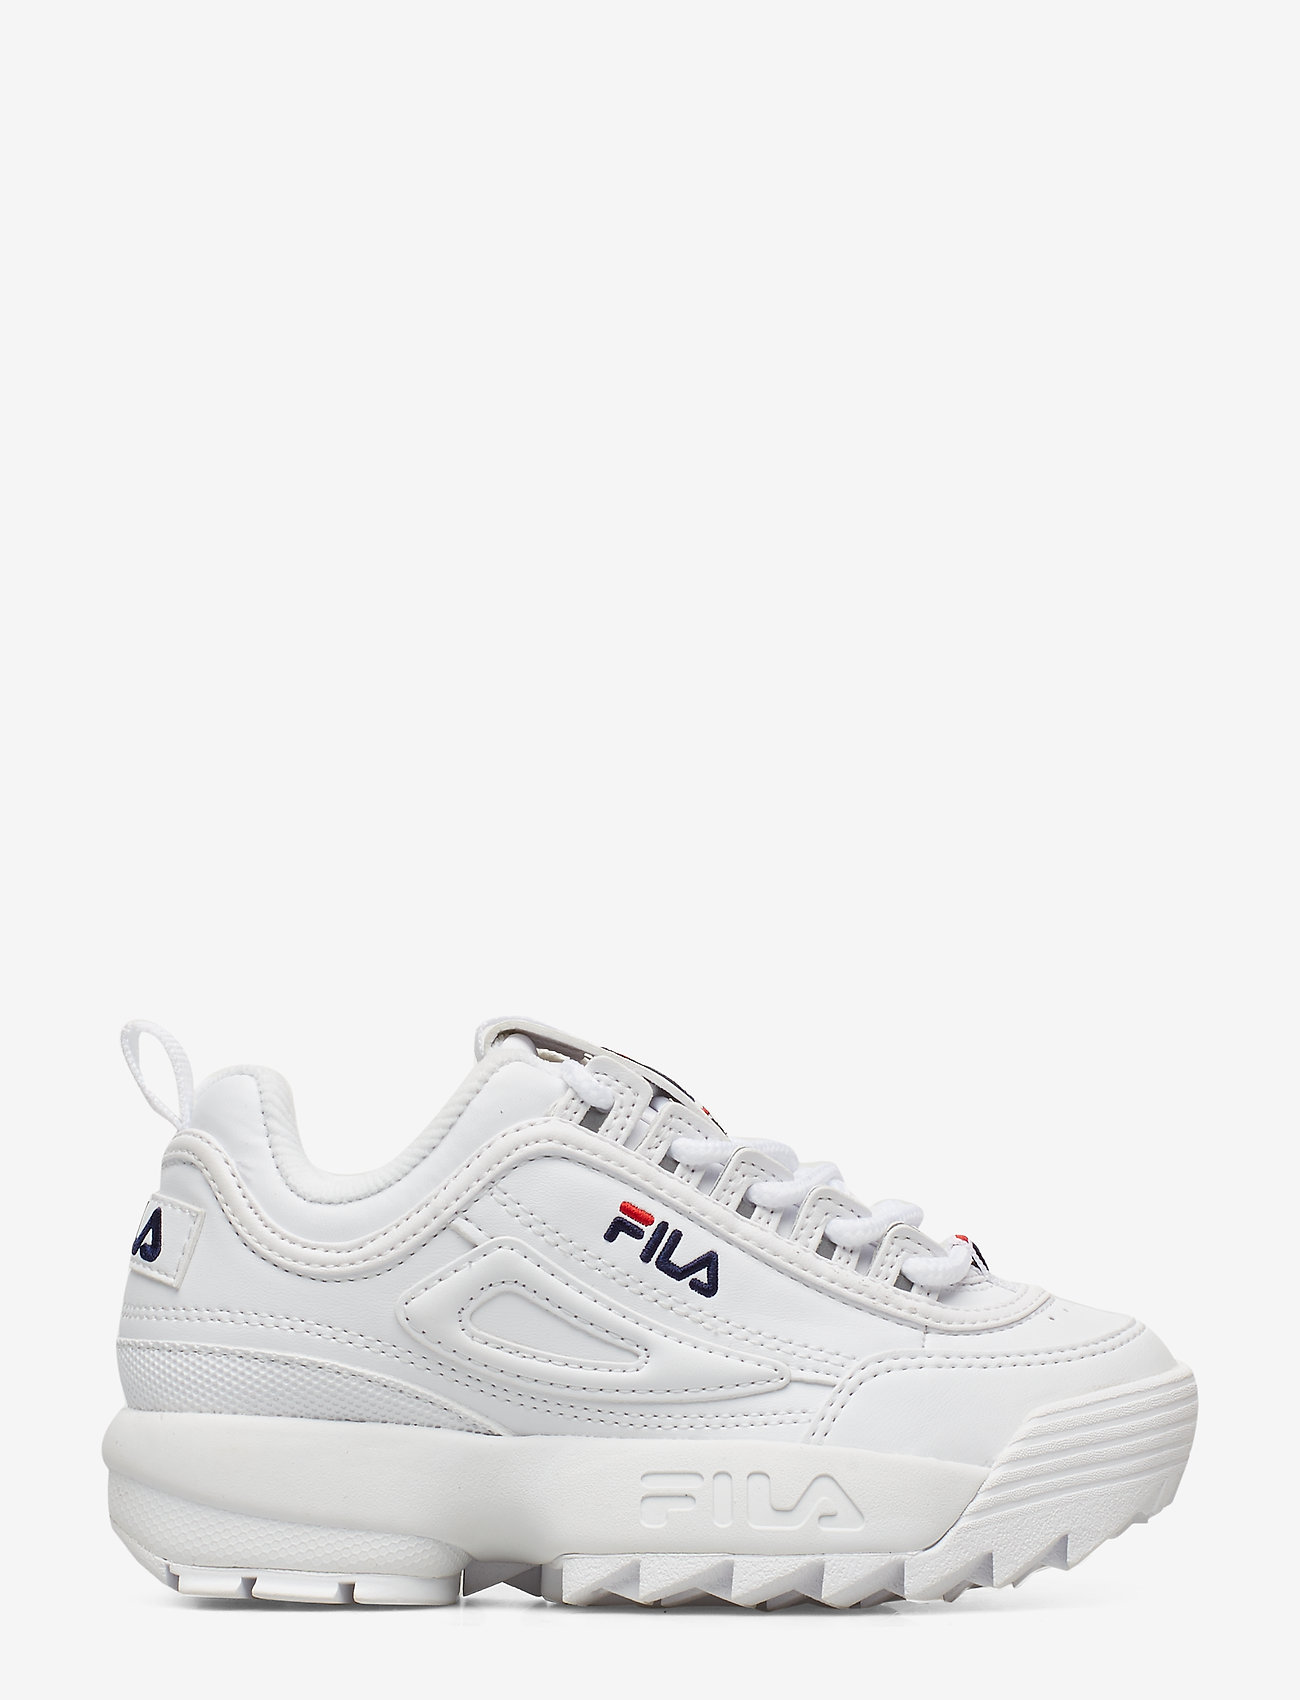 white infant sneakers